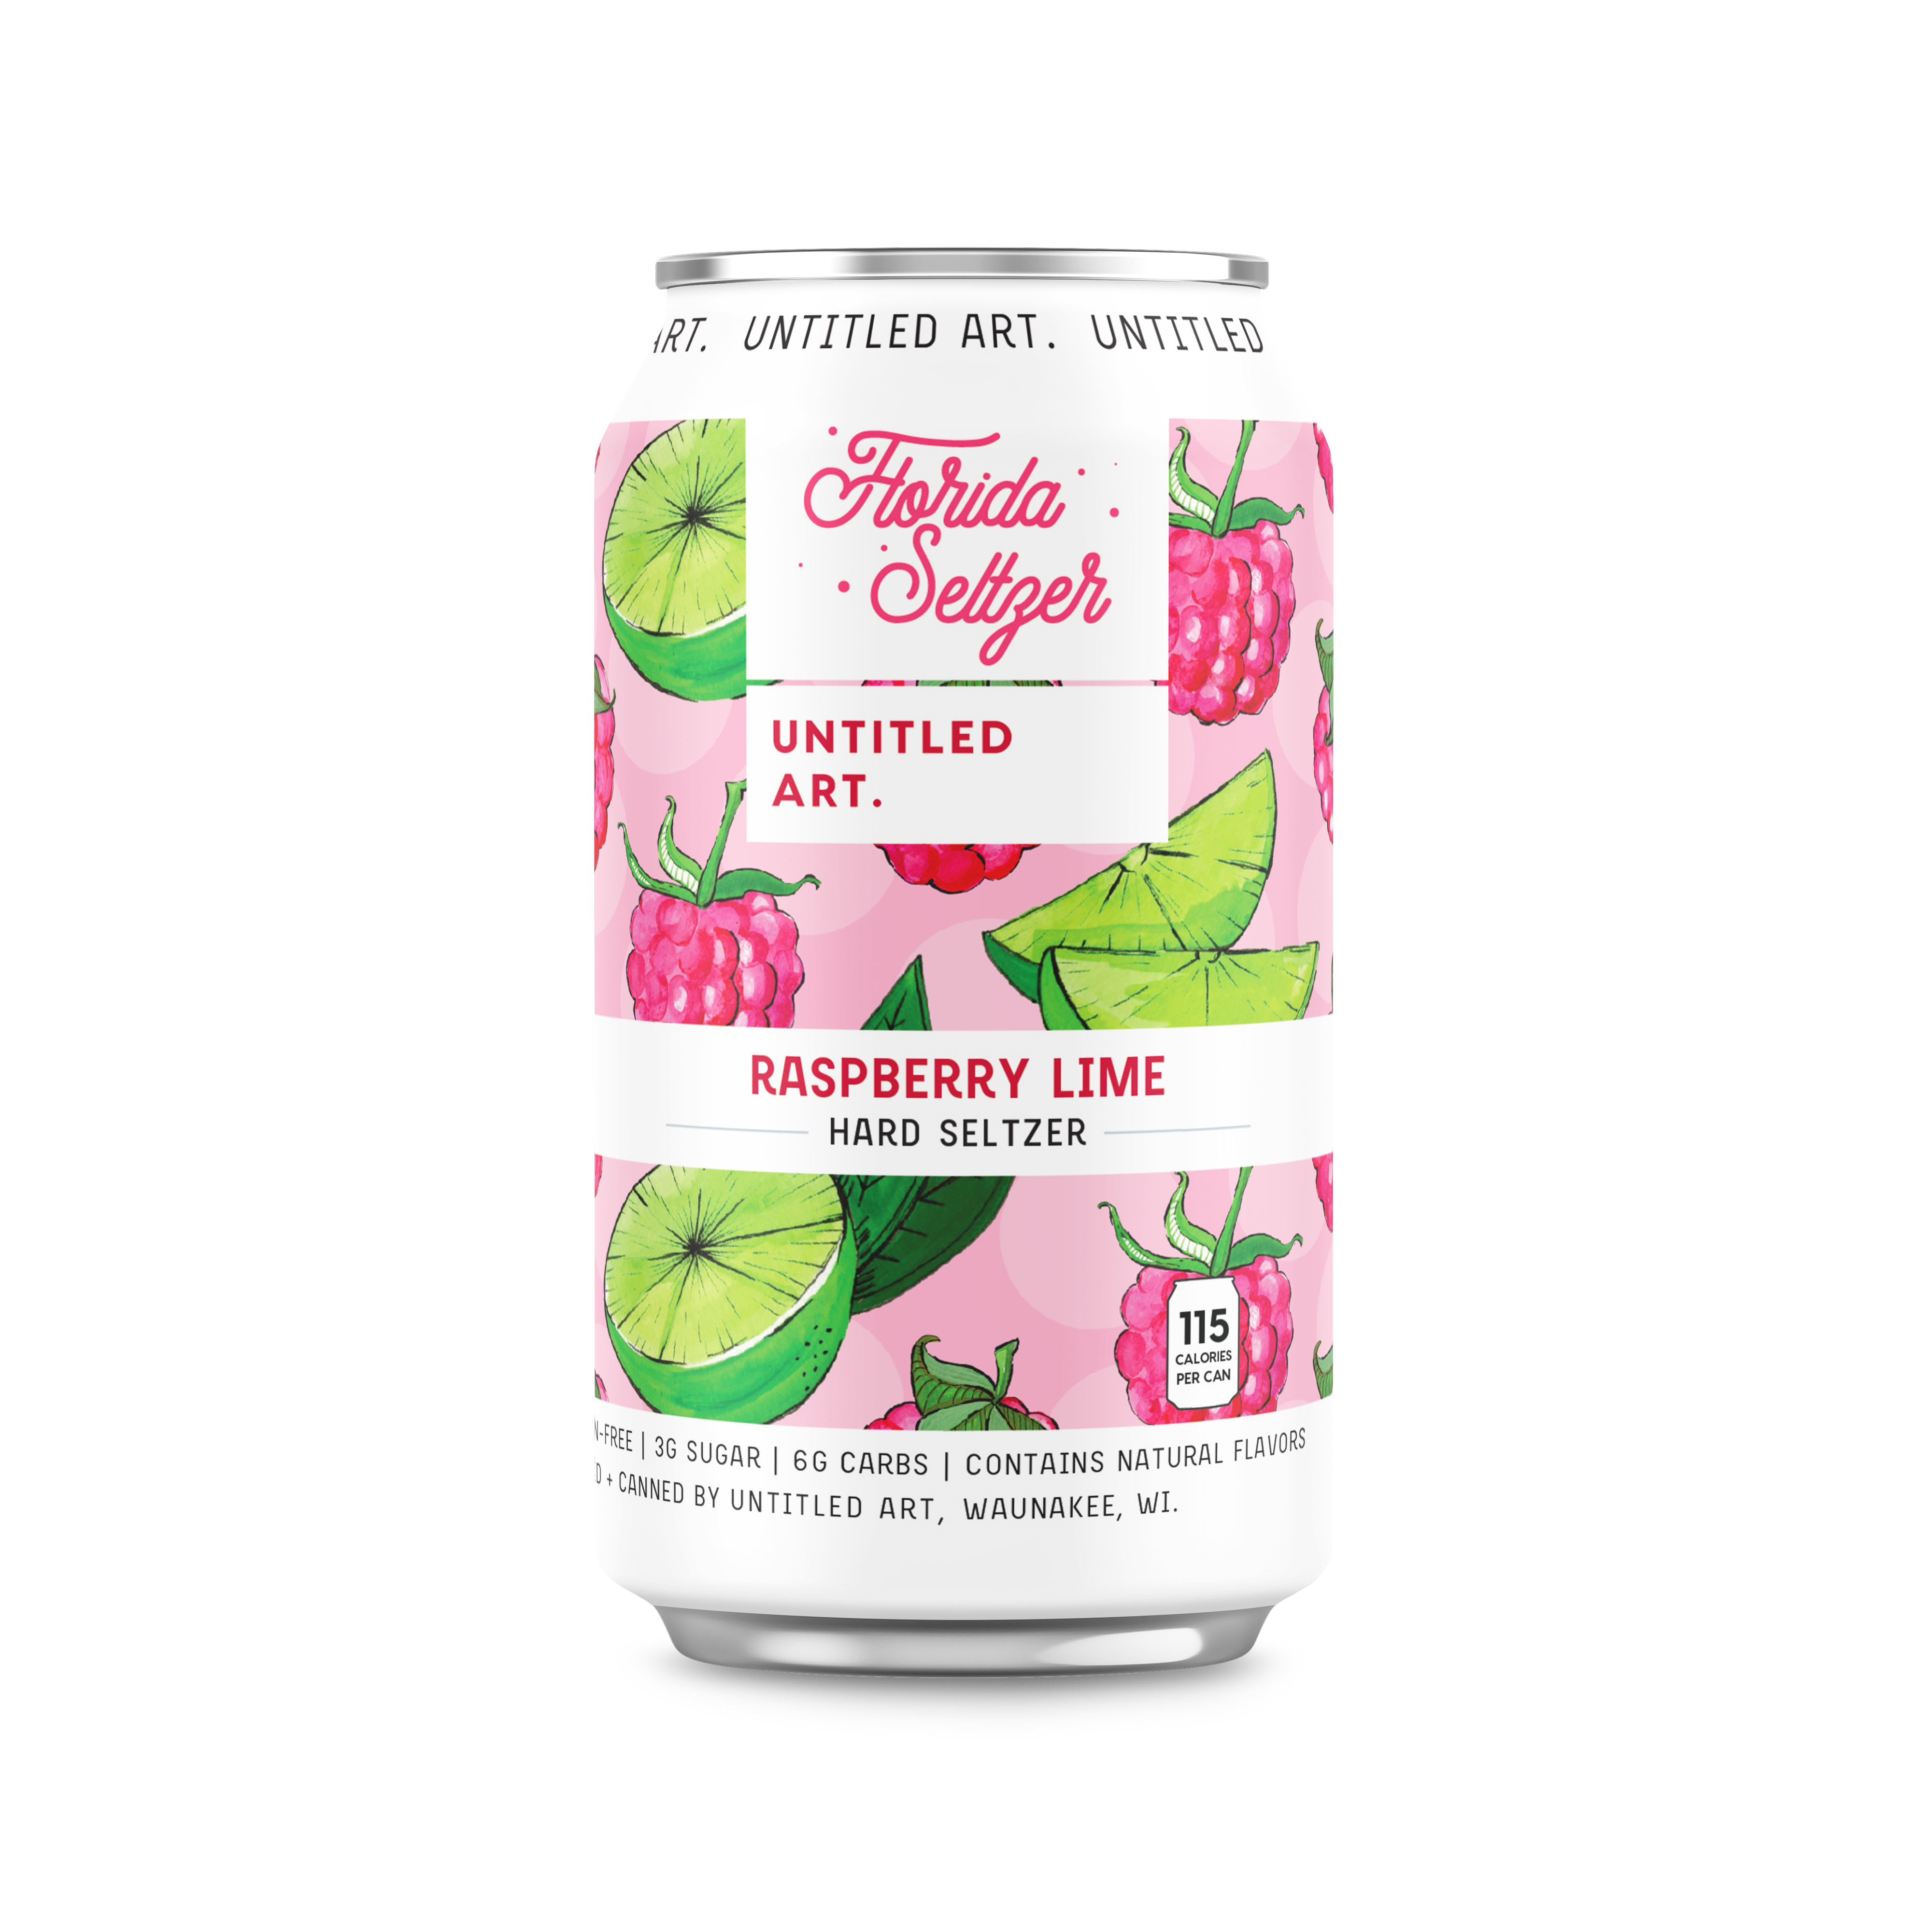 A can of strawberry lime iced tea.